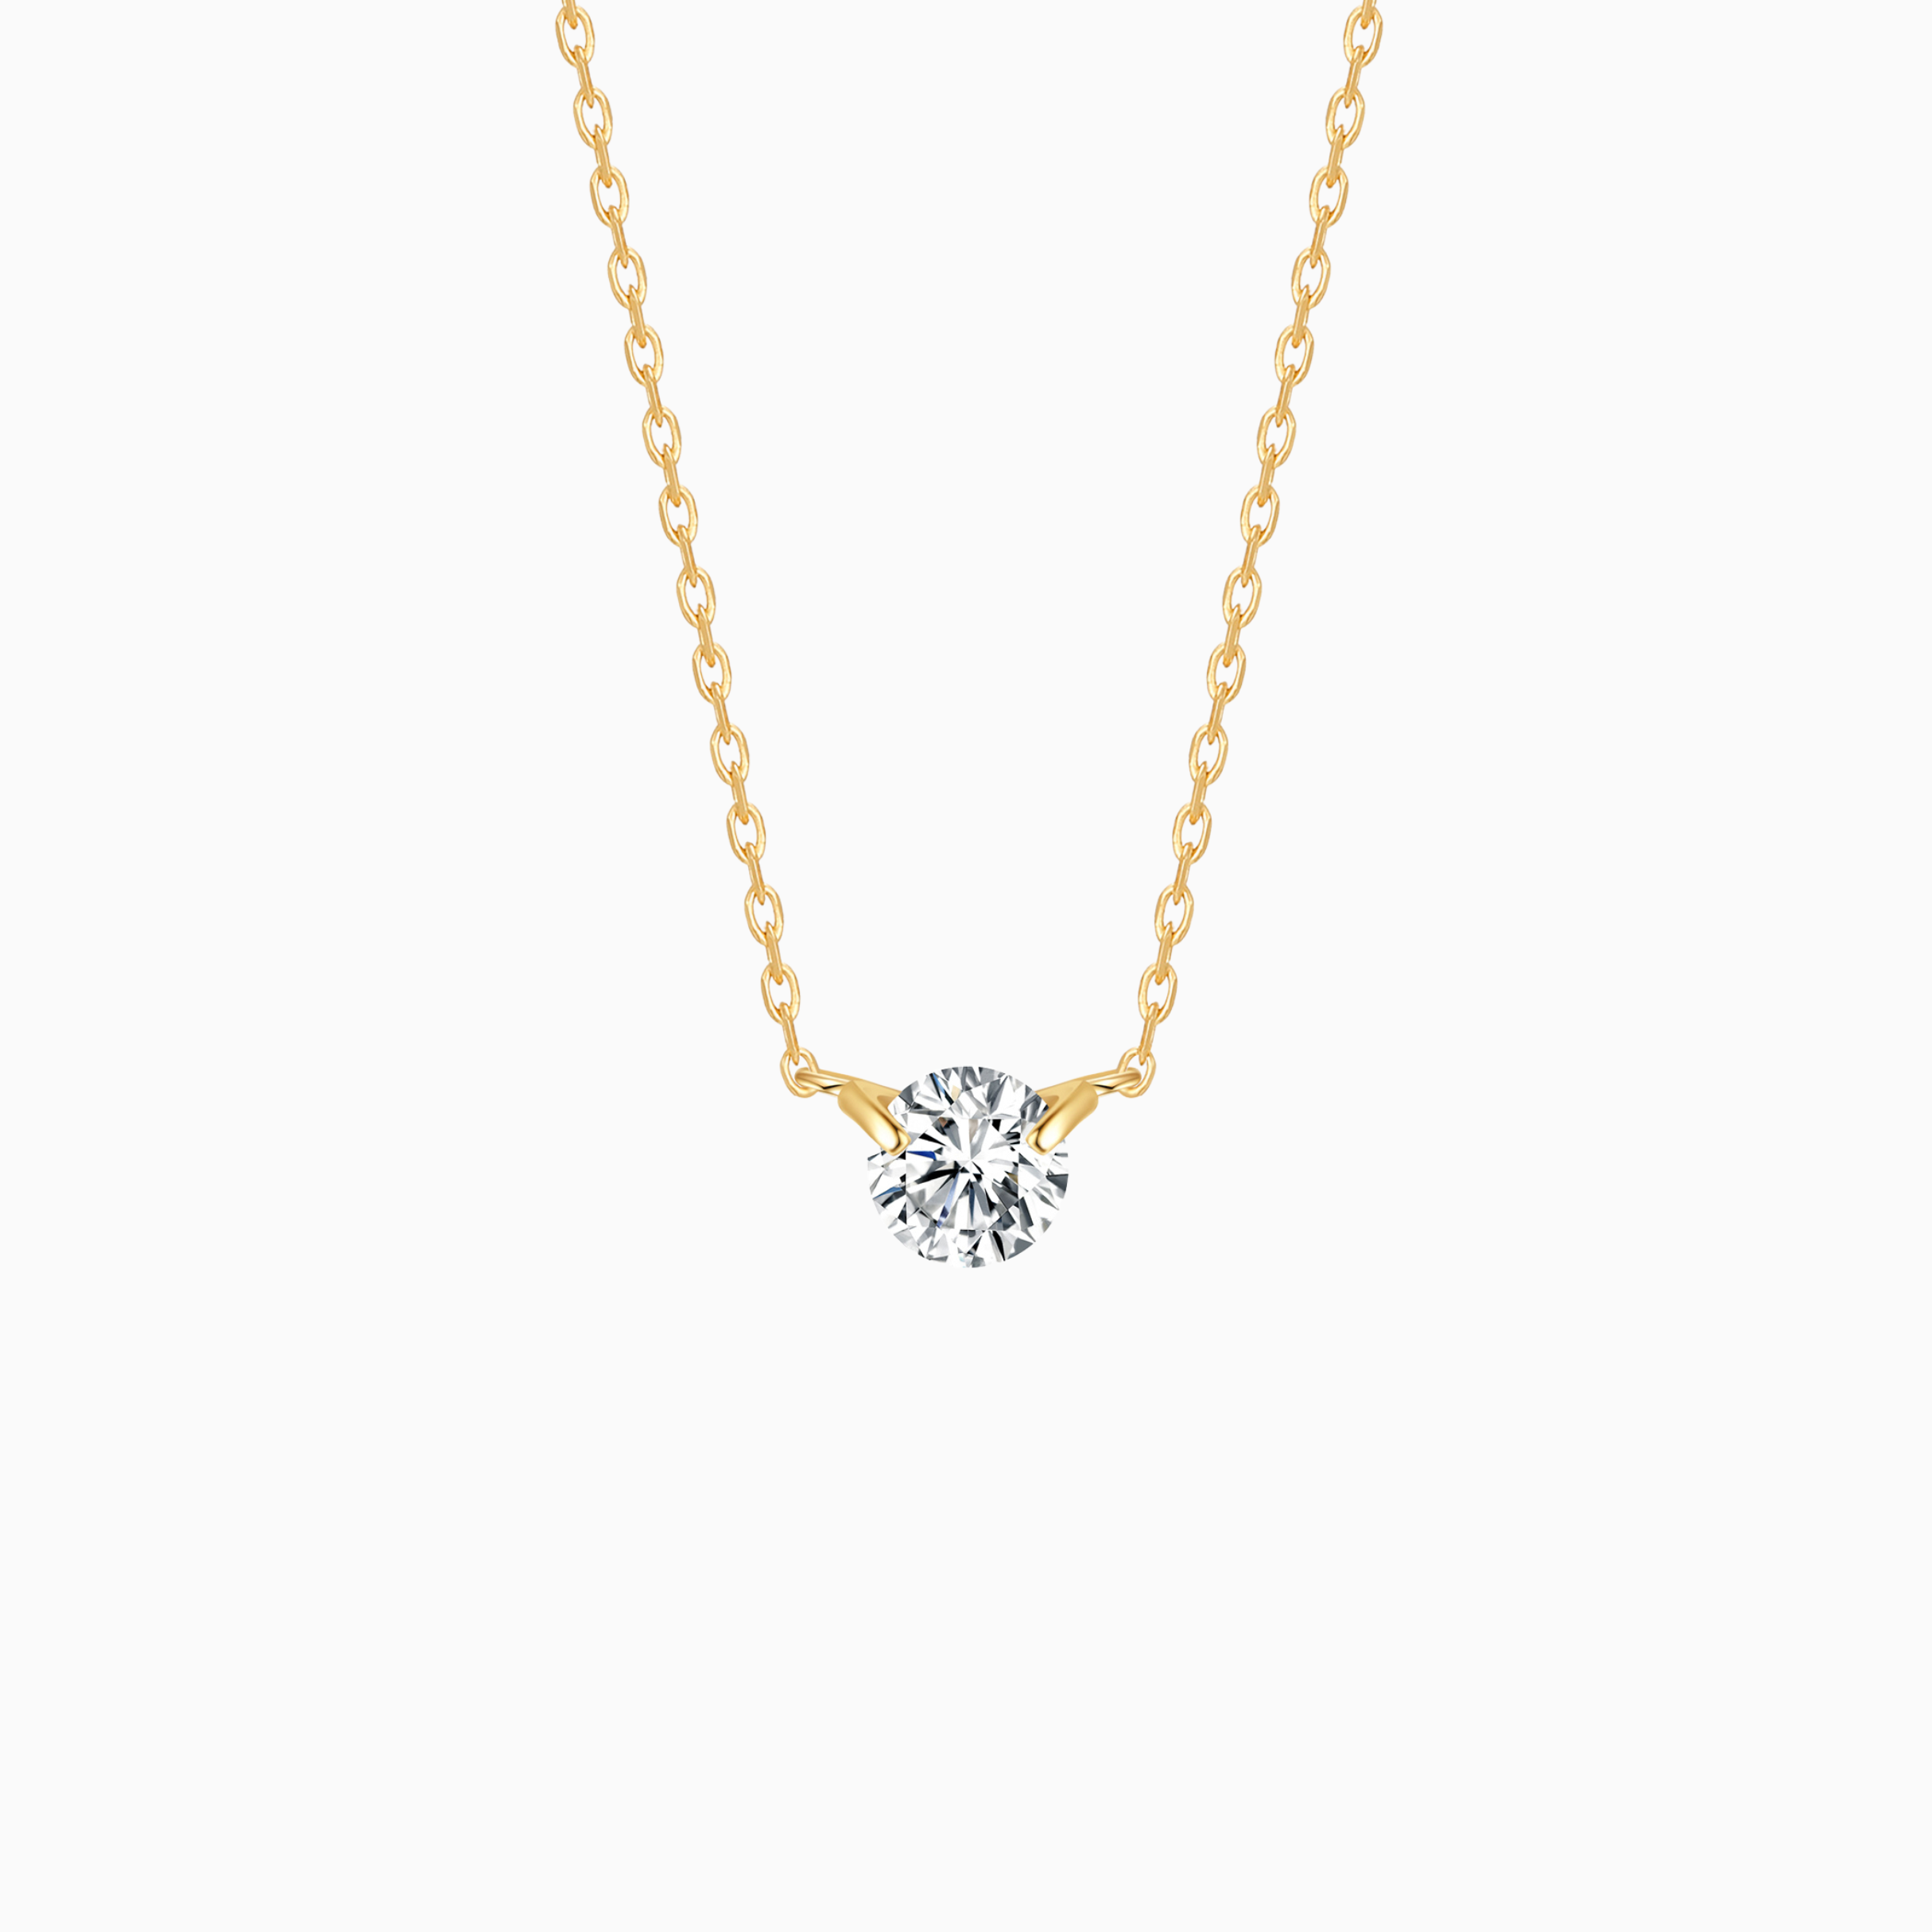 Eira Necklace - Solid Gold